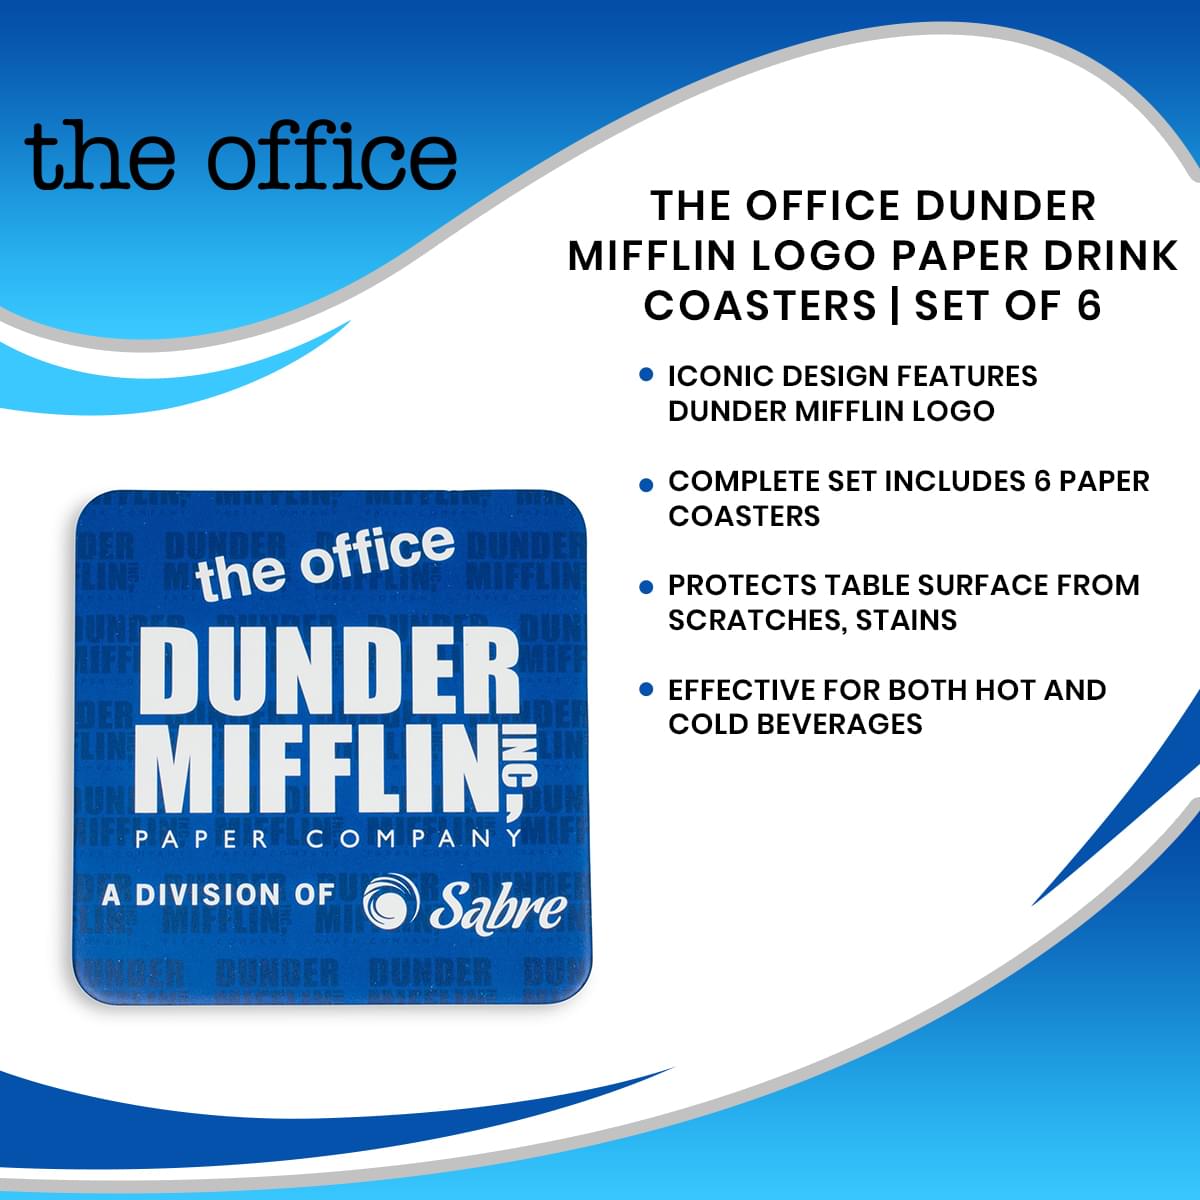 The Office Dunder Mifflin Coasters, Set of 6